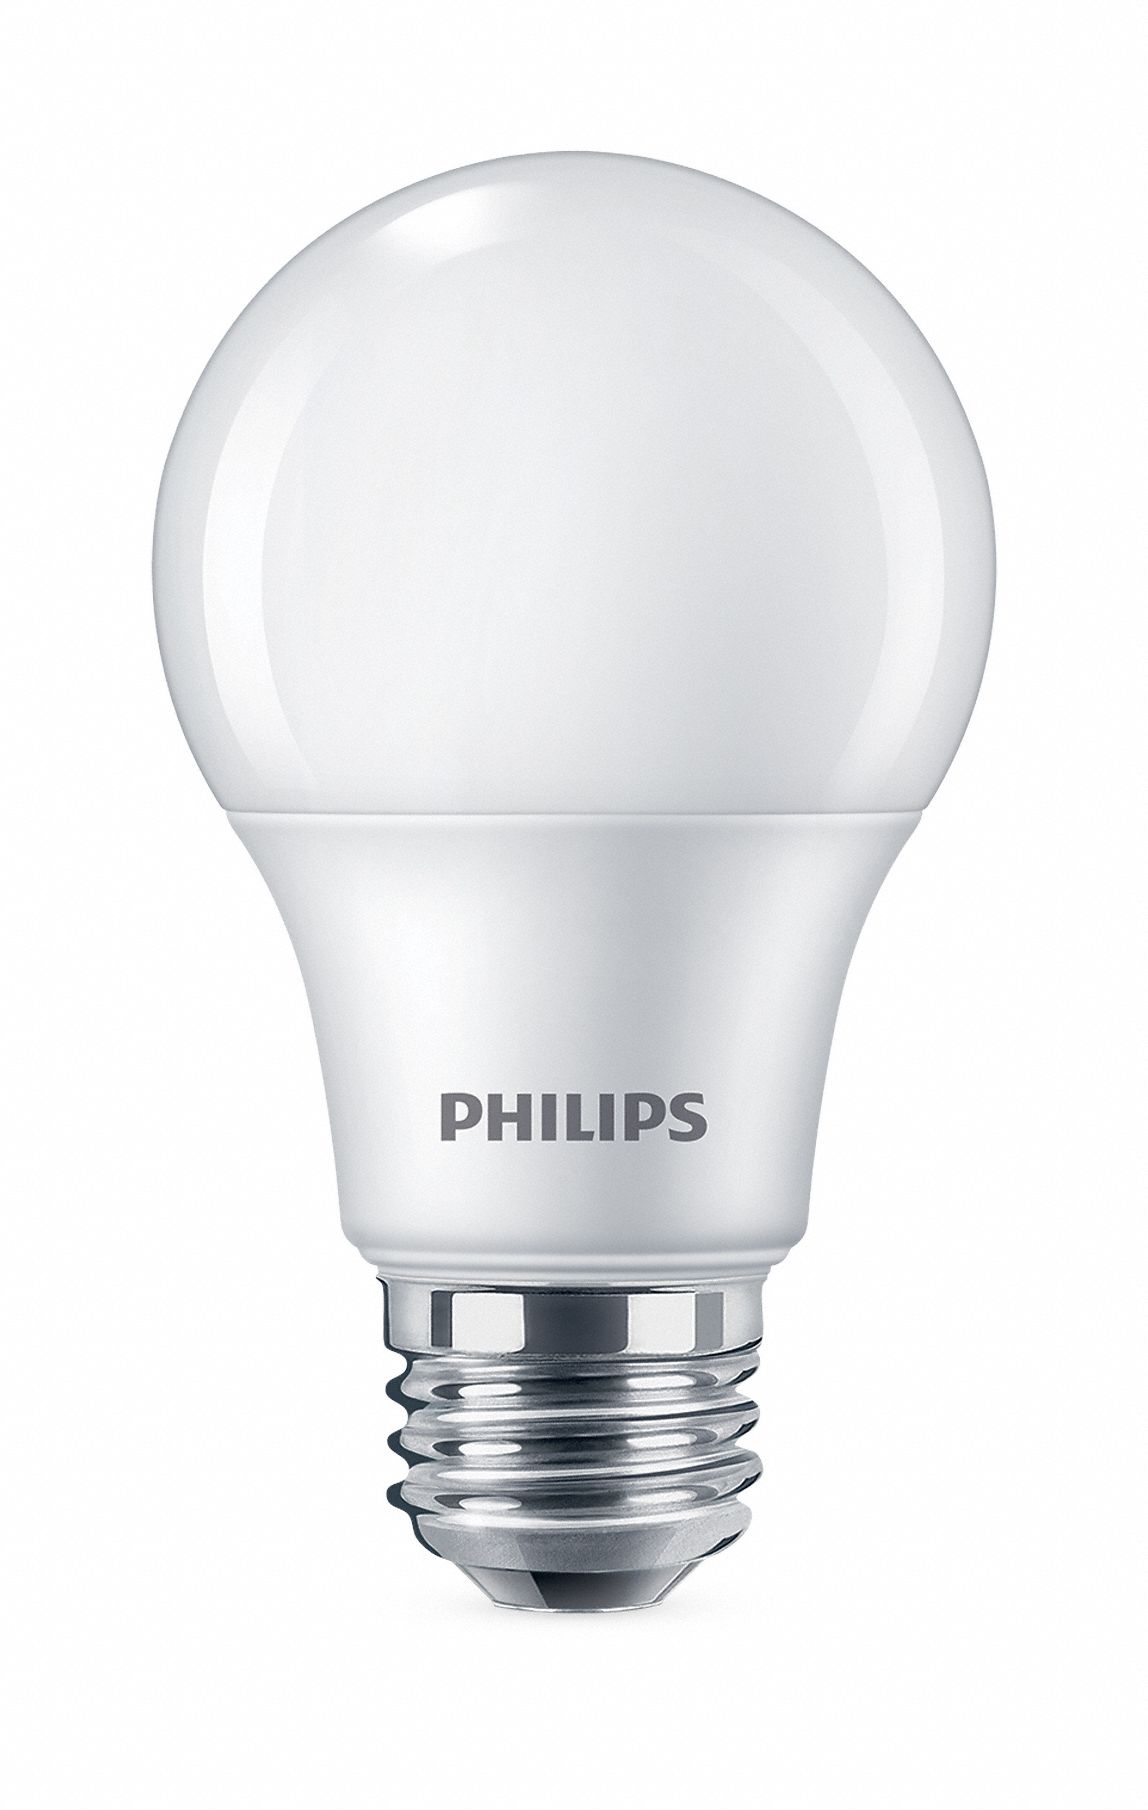 COMPACT LED BULB,4 1/6 IN L,8.5 W